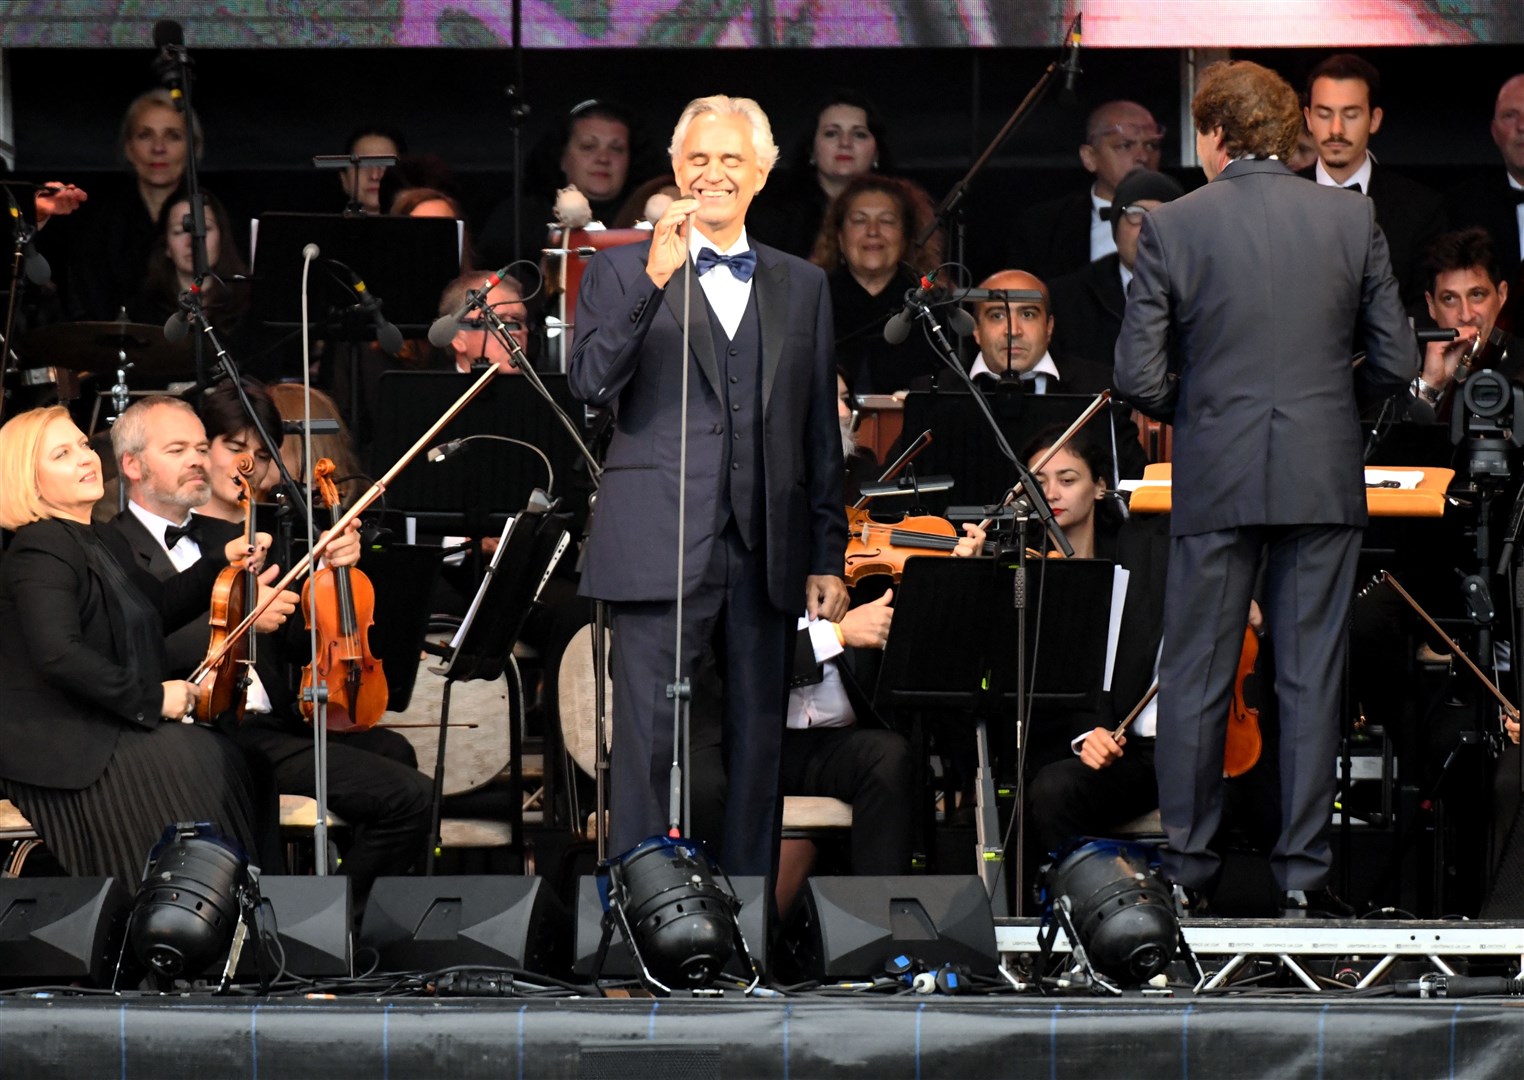 Andrea Bocelli arrives onstage. Picture: James Mackenzie